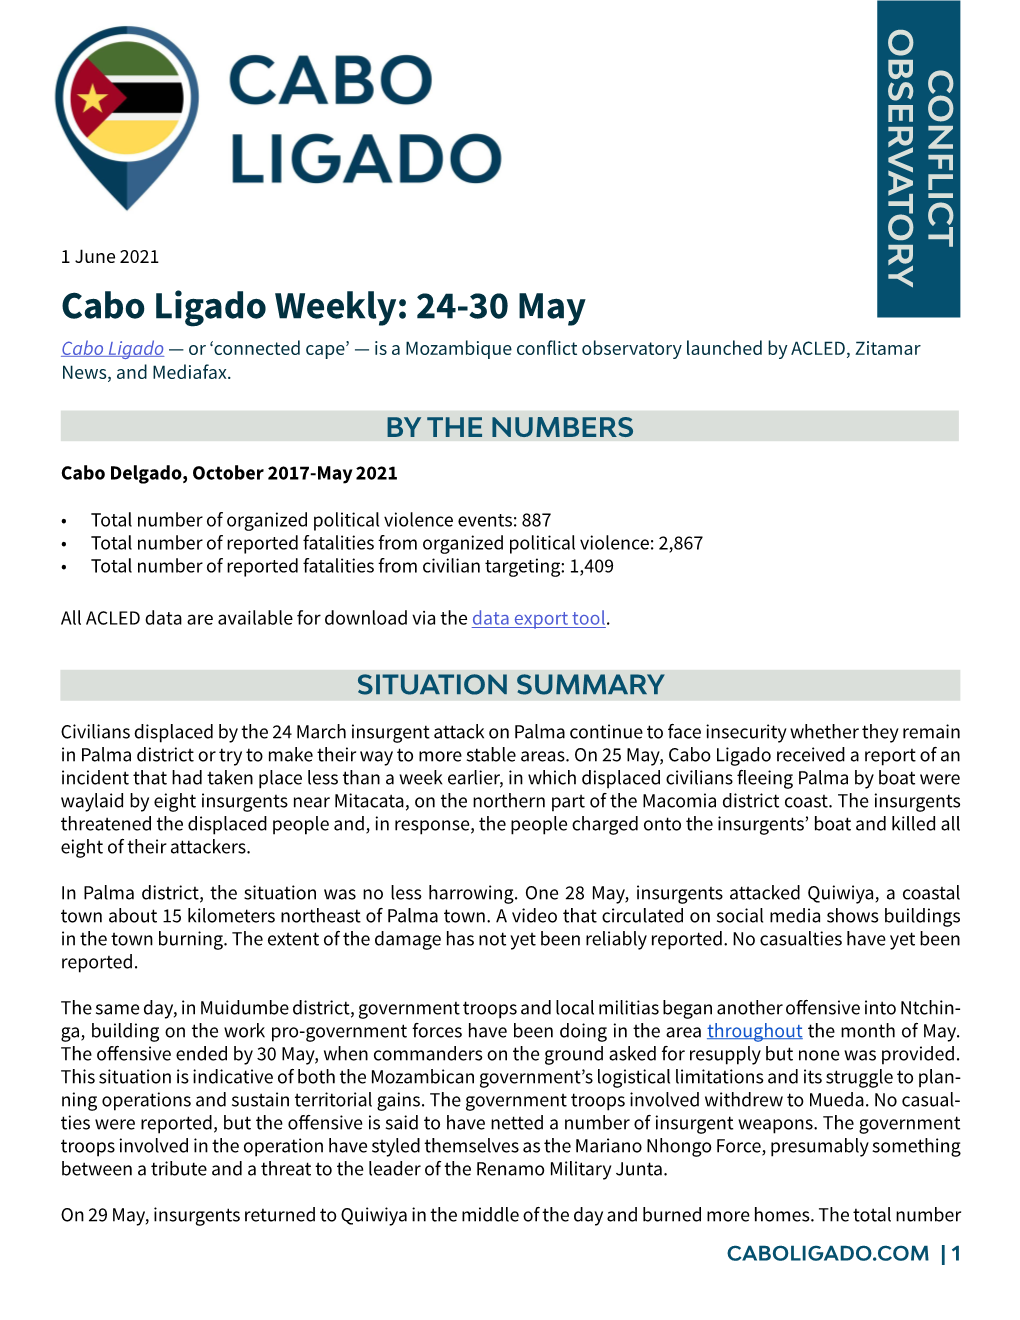 Cabo Ligado Weekly: 24-30 May 24-30 Weekly: Ligado Cabo on 29 May, Insurgents Returned to Quiwiya in the Middle of the Day and Burned More Homes